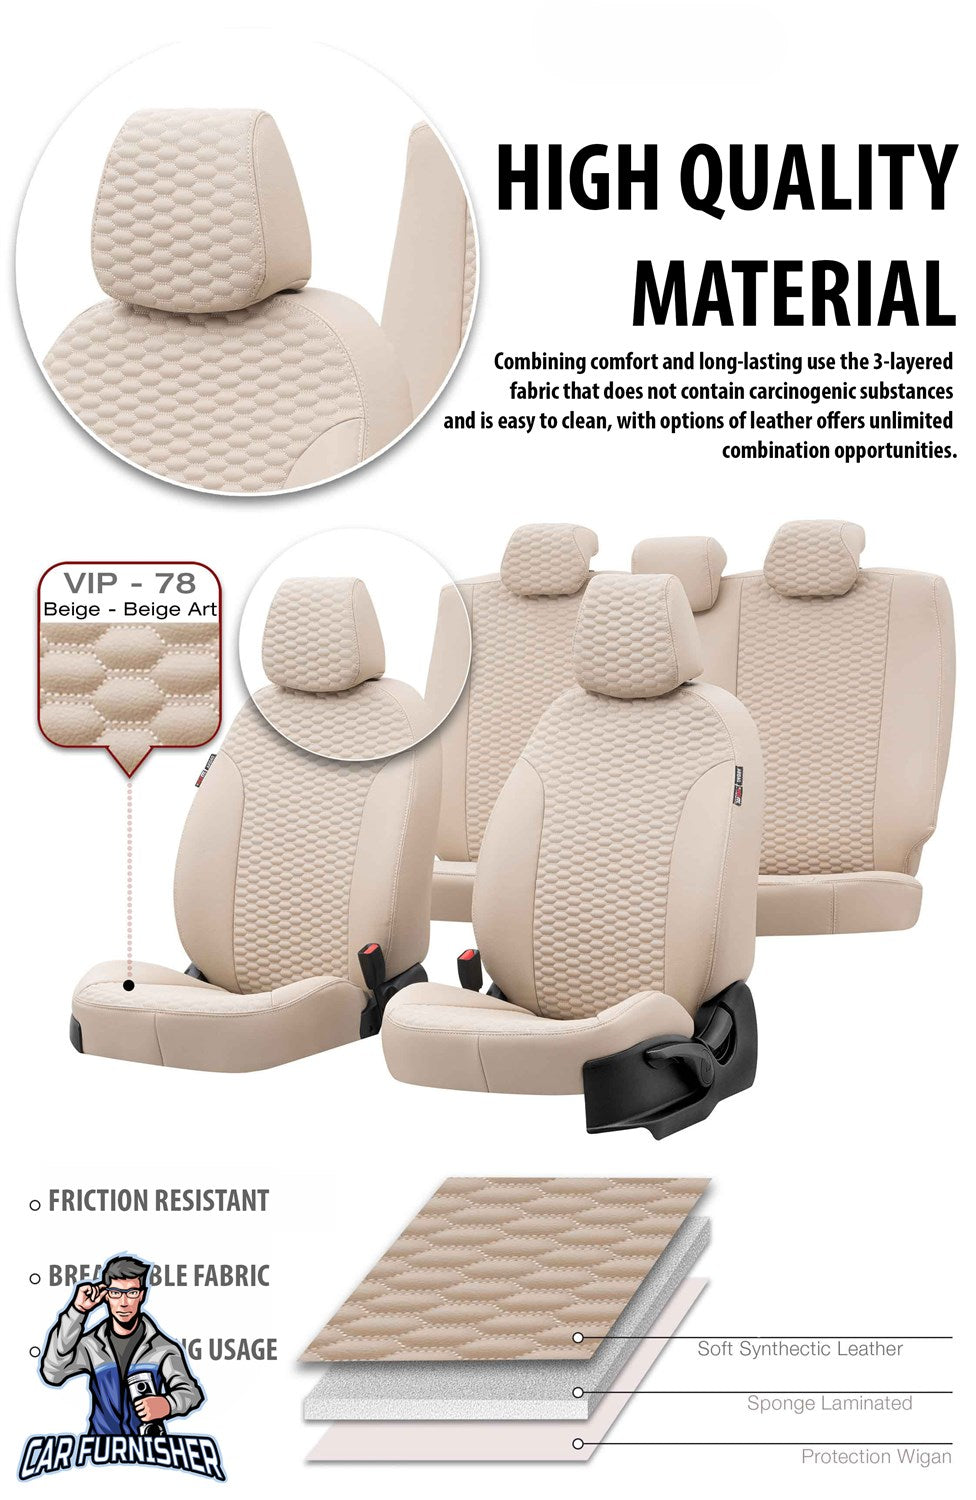 Seat Alhambra Seat Covers Tokyo Leather Design Black Leather